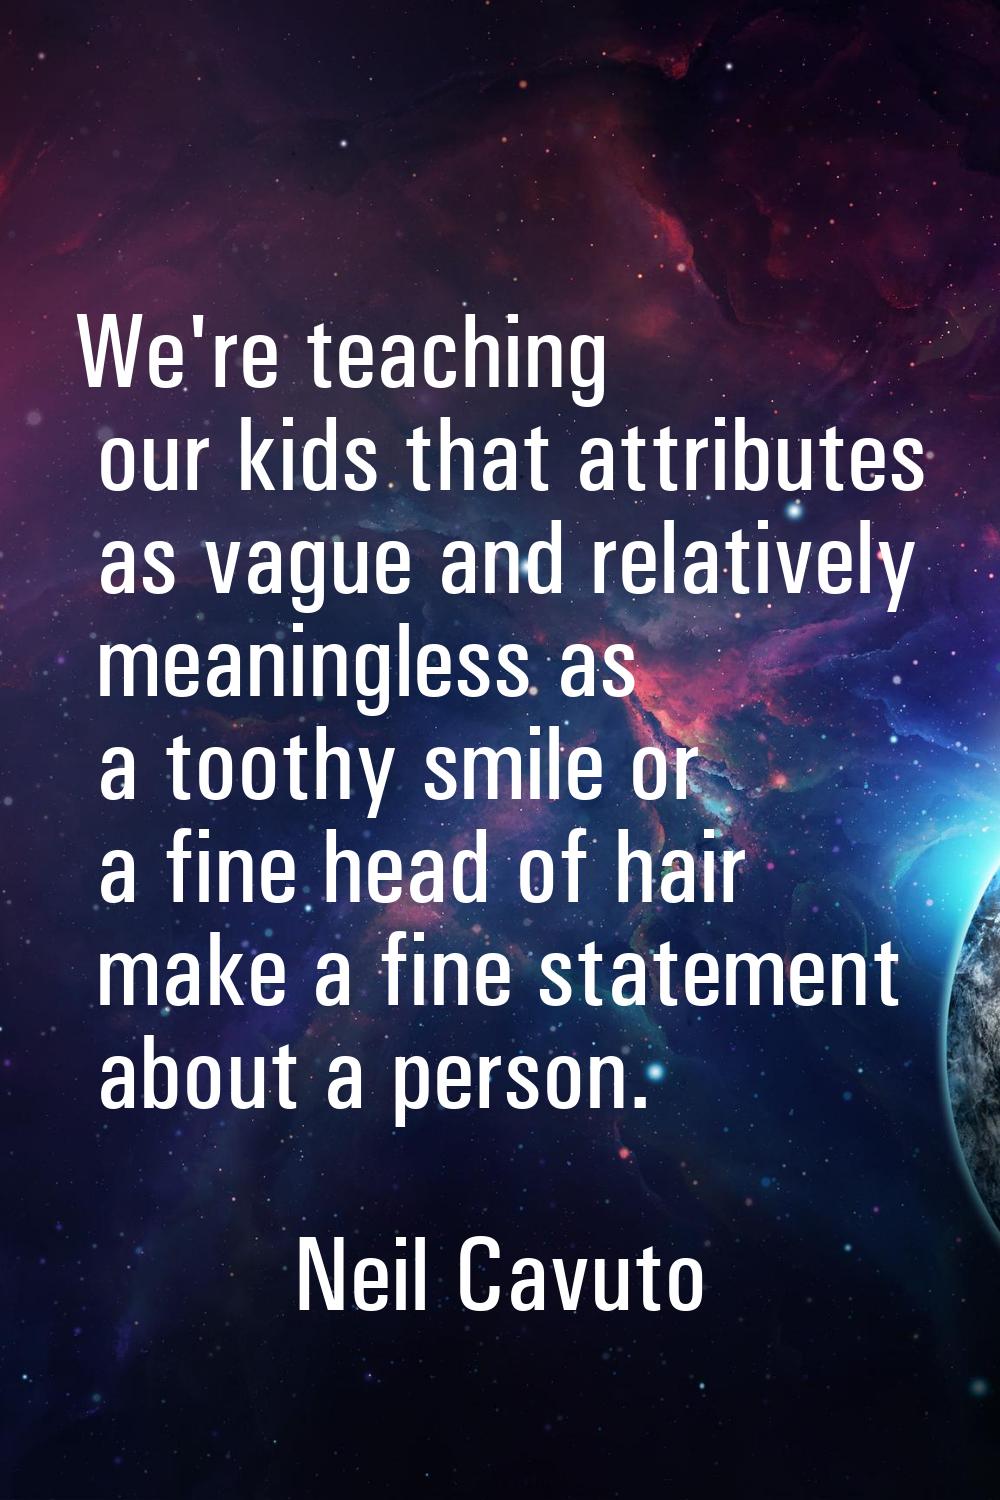 We're teaching our kids that attributes as vague and relatively meaningless as a toothy smile or a 